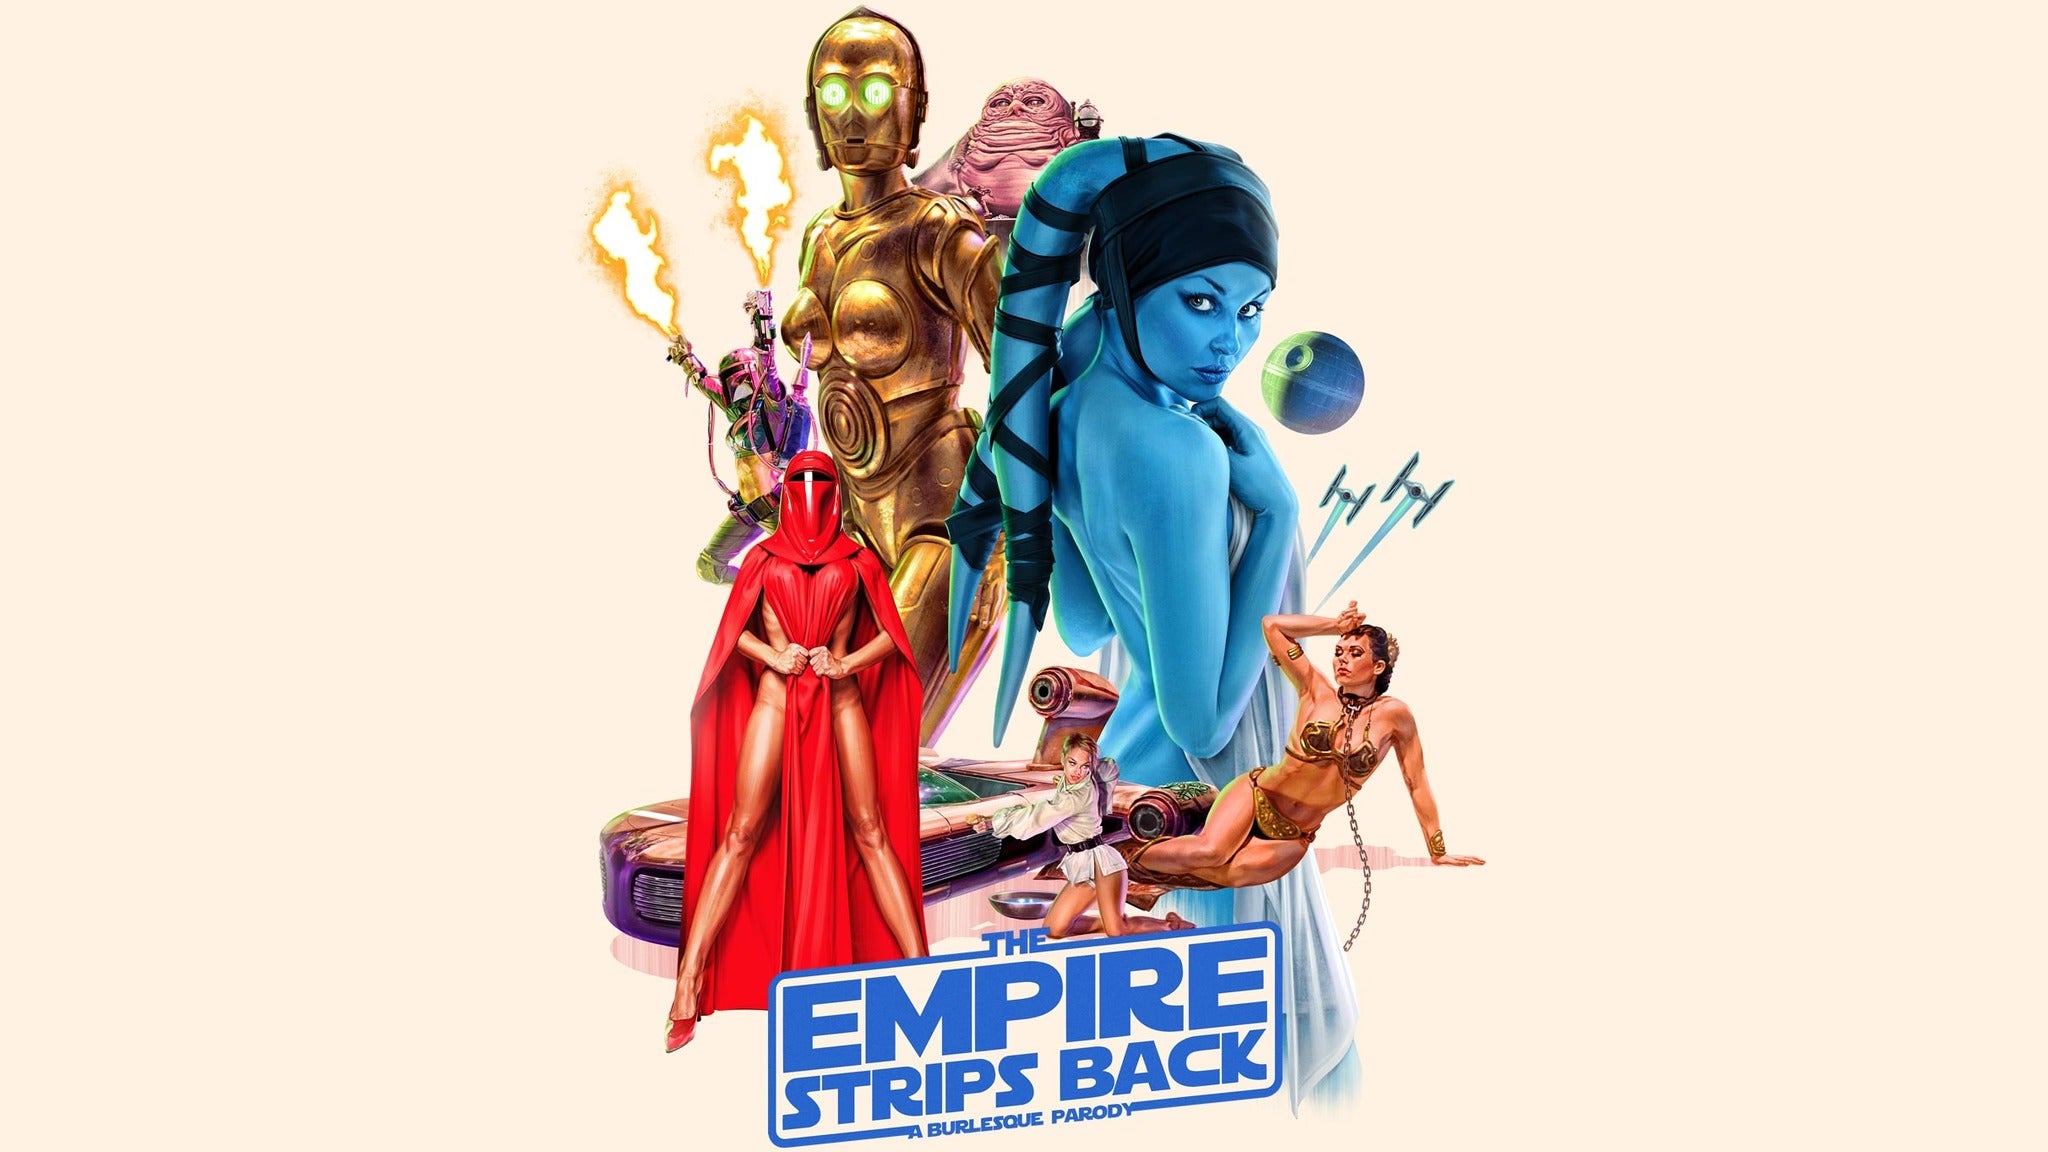 The Empire Strips Back: A Burlesque Parody in Phoenix promo photo for Official Platinum presale offer code